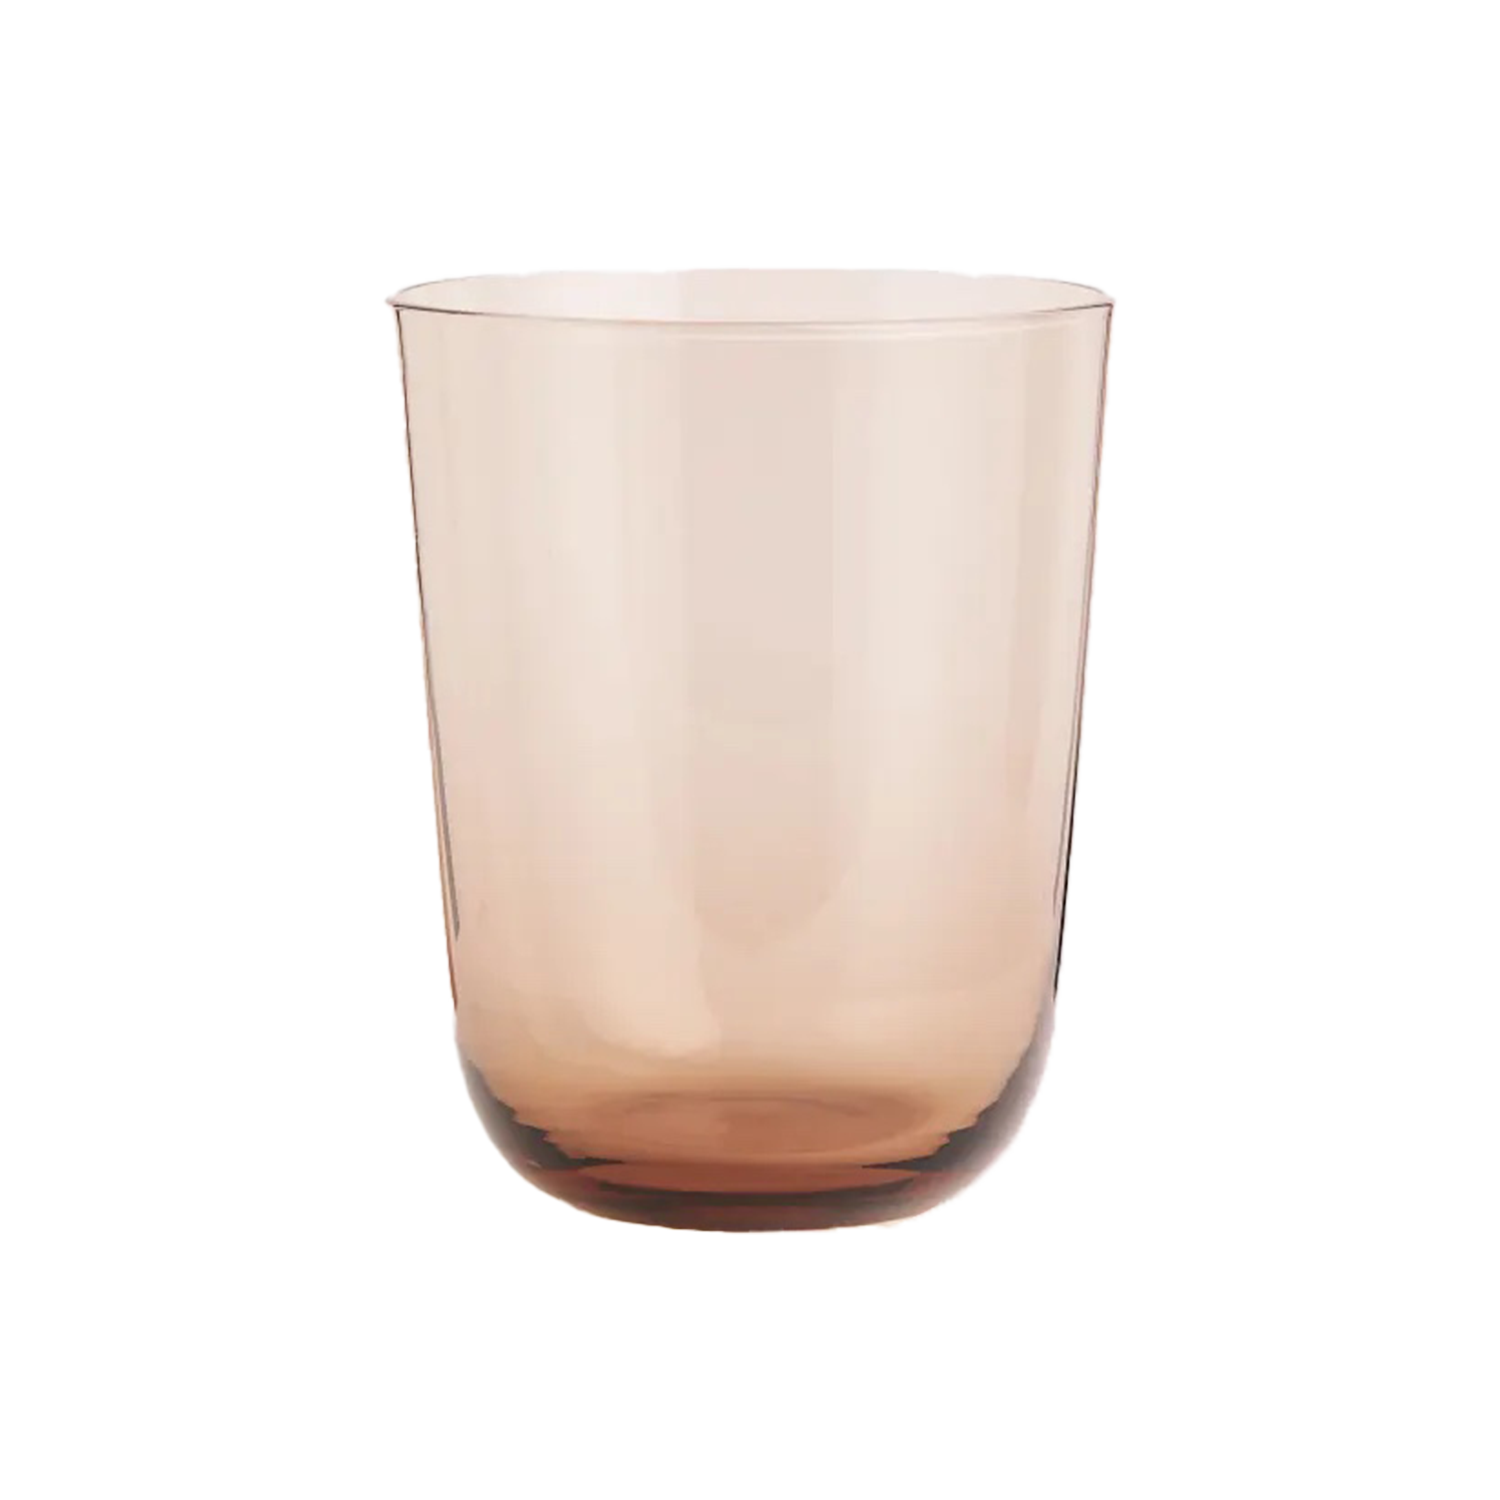 tinted H&M home beverage glass